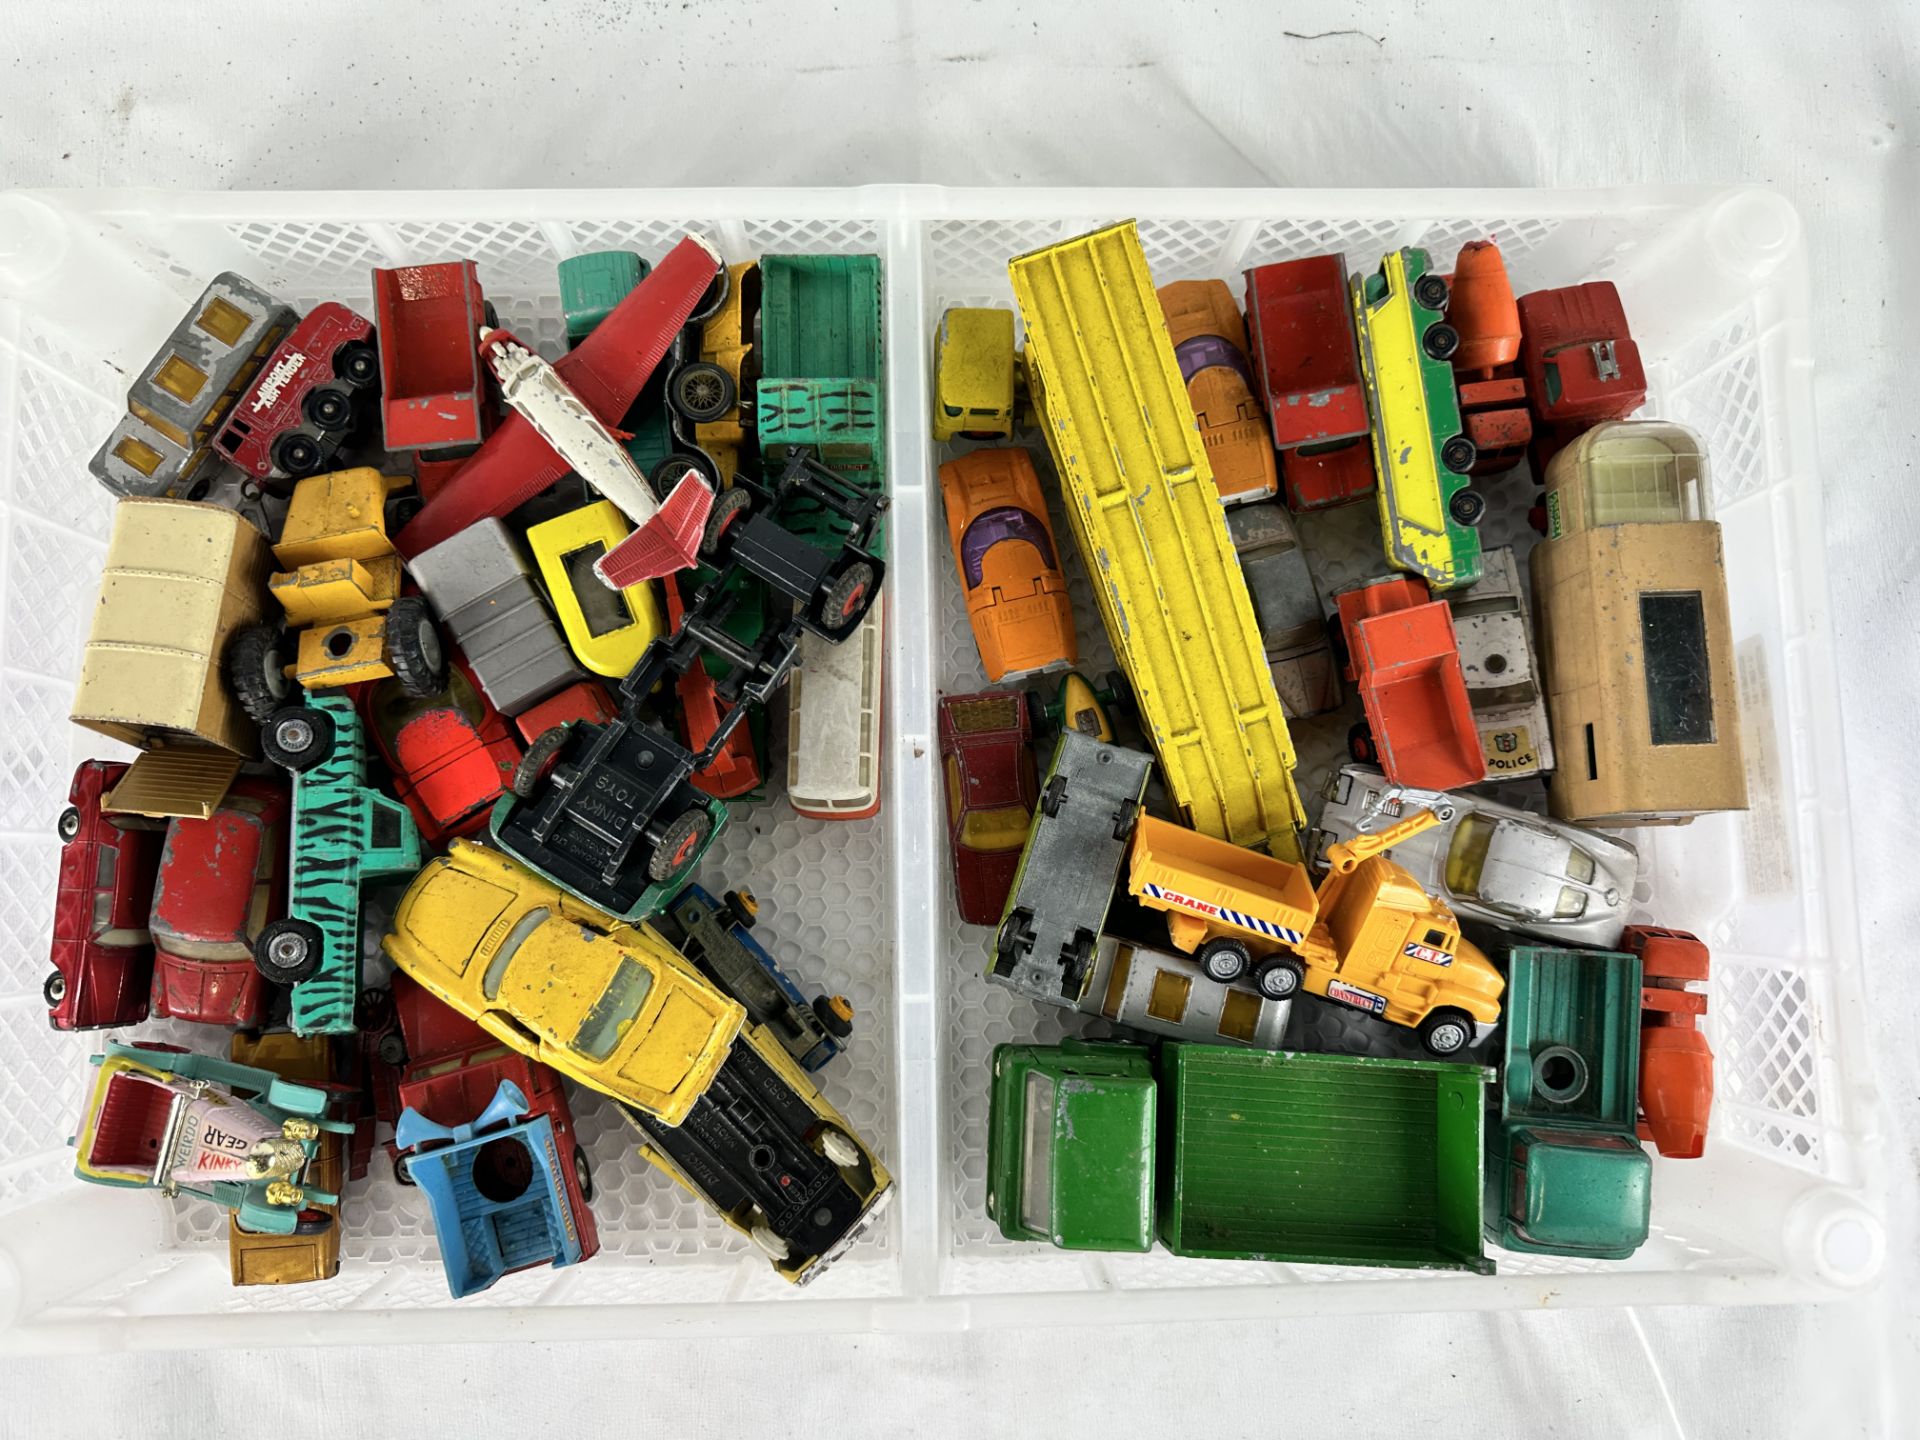 Quantity of die cast toy cars and vehicles